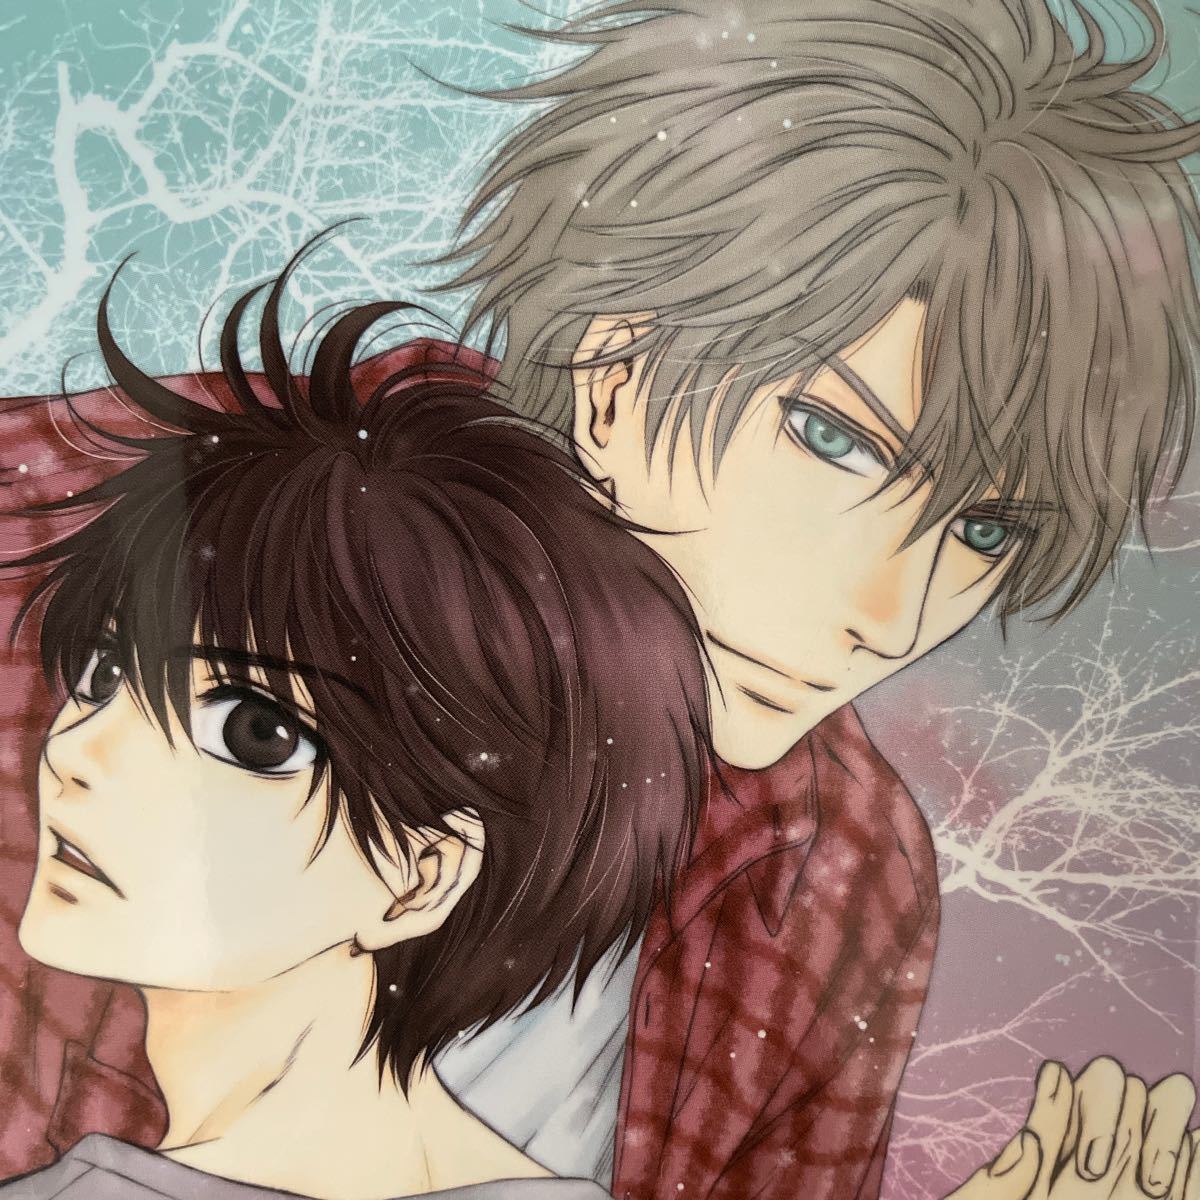 Paypayフリマ Super Lovers 10 あべ美幸 ワンコ攻め ほのぼの 男前受け 身長 体格差 アニメ化された王道の純粋bl